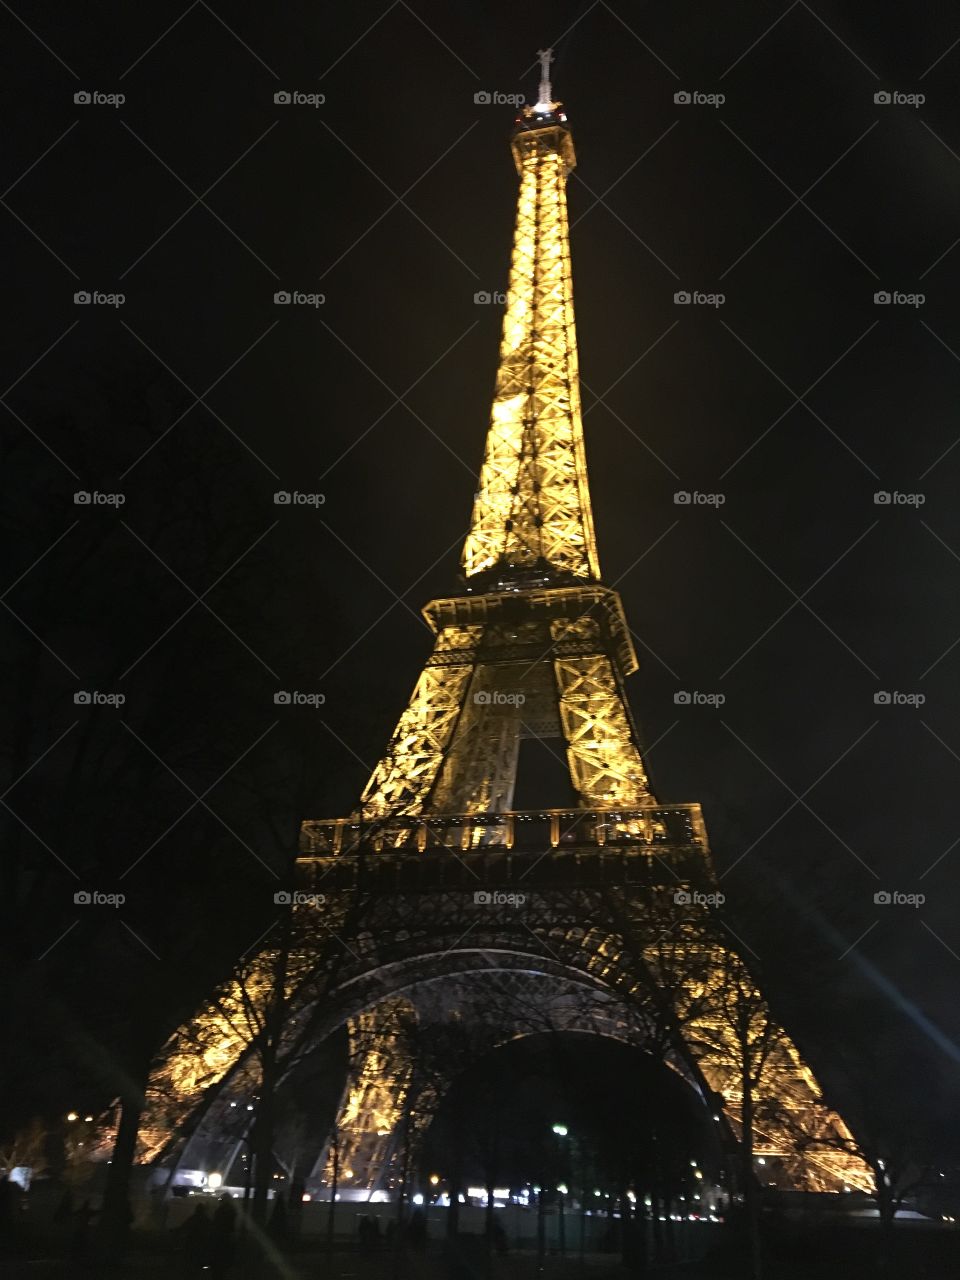 The Eiffel Tower in Paris, France at Night when it is lit up 